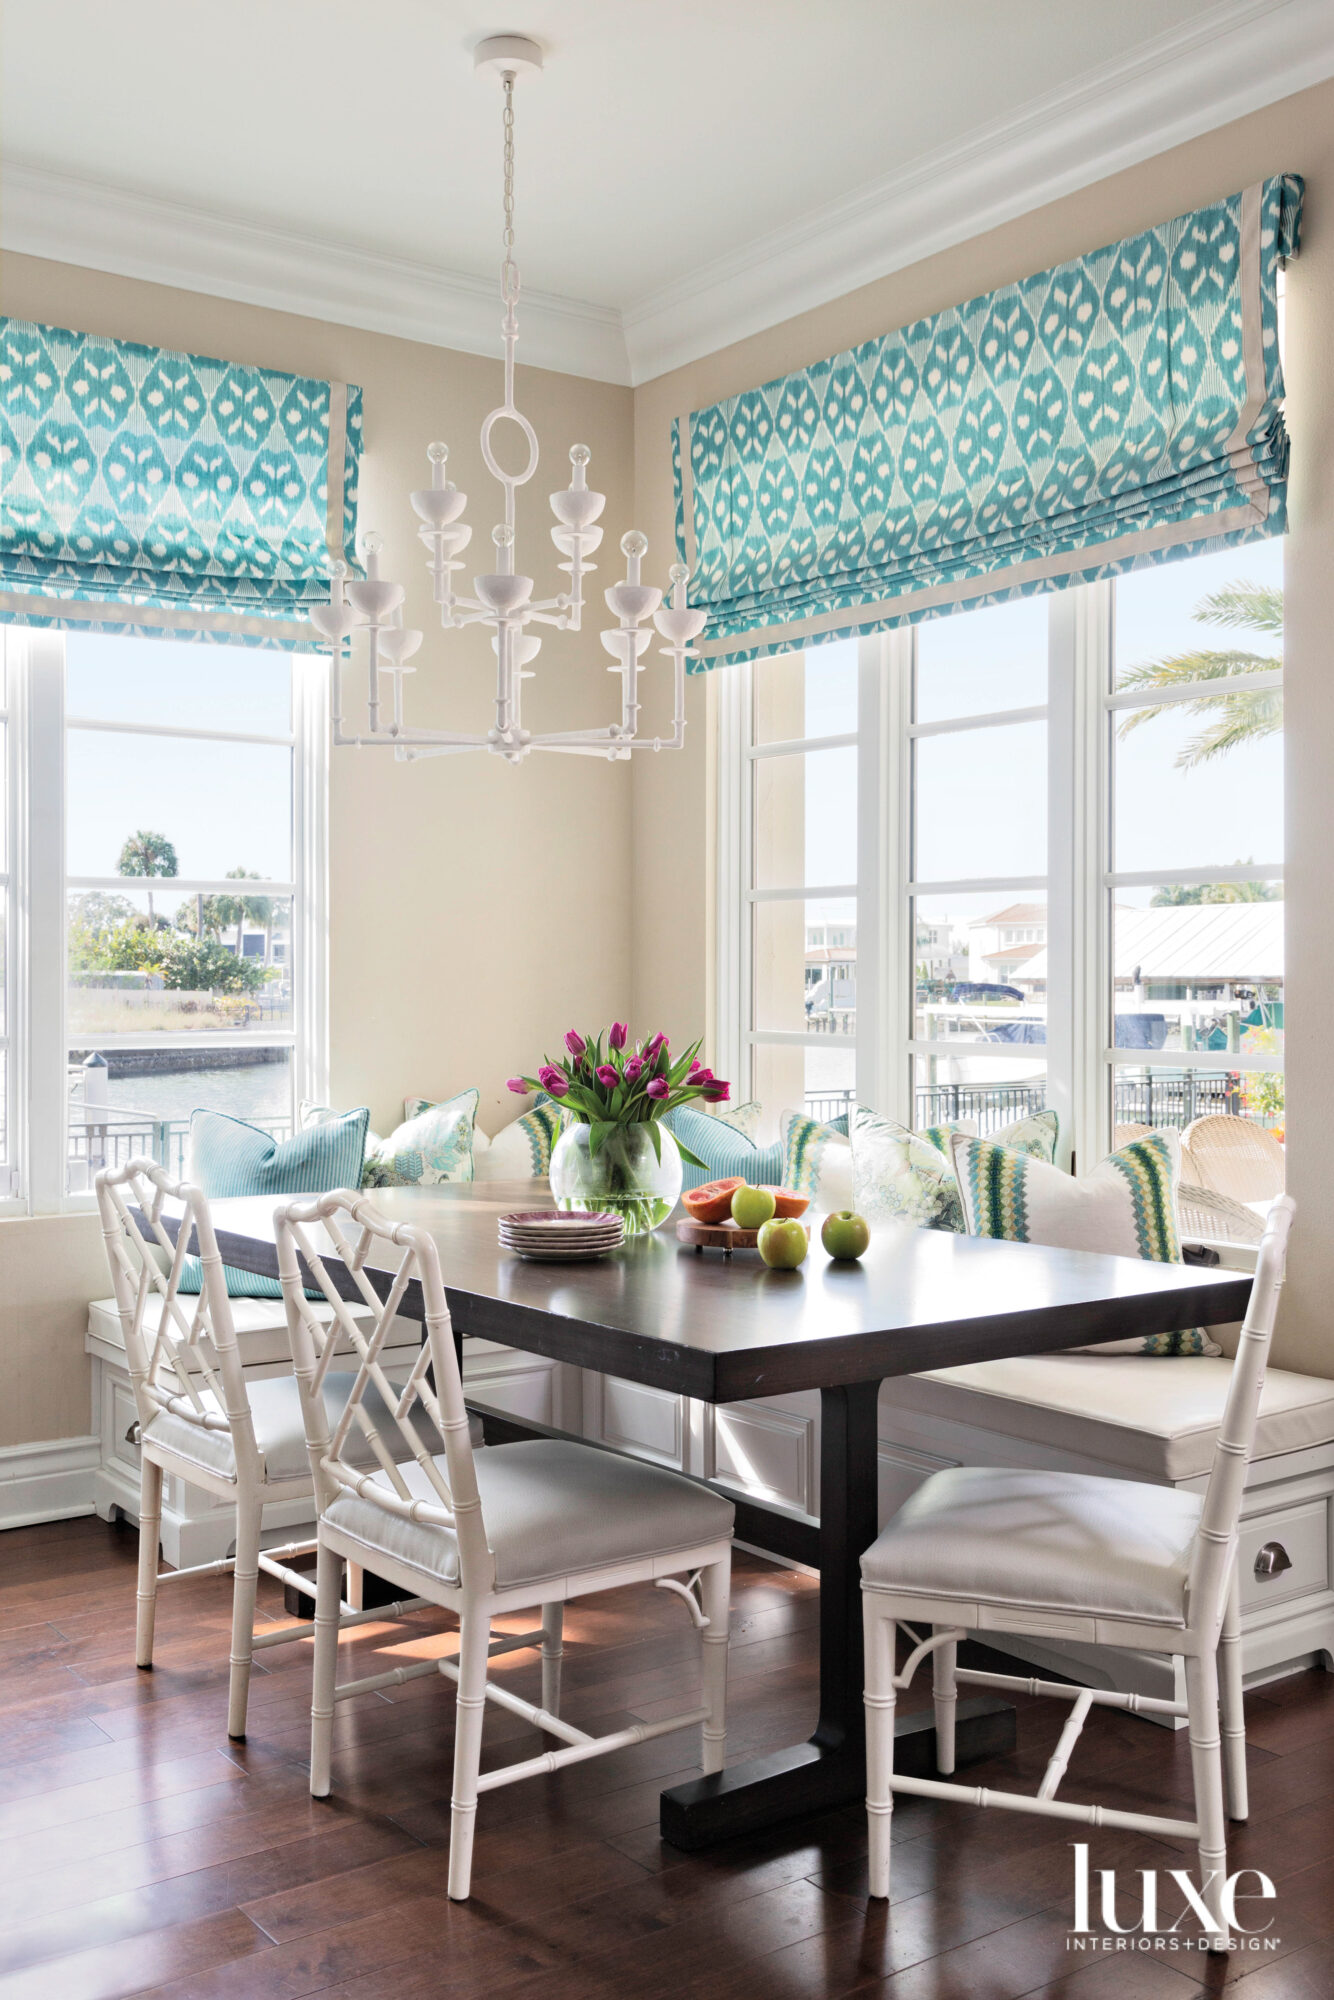 Breakfast nook with banquette, wood table and blue patterned window shades.